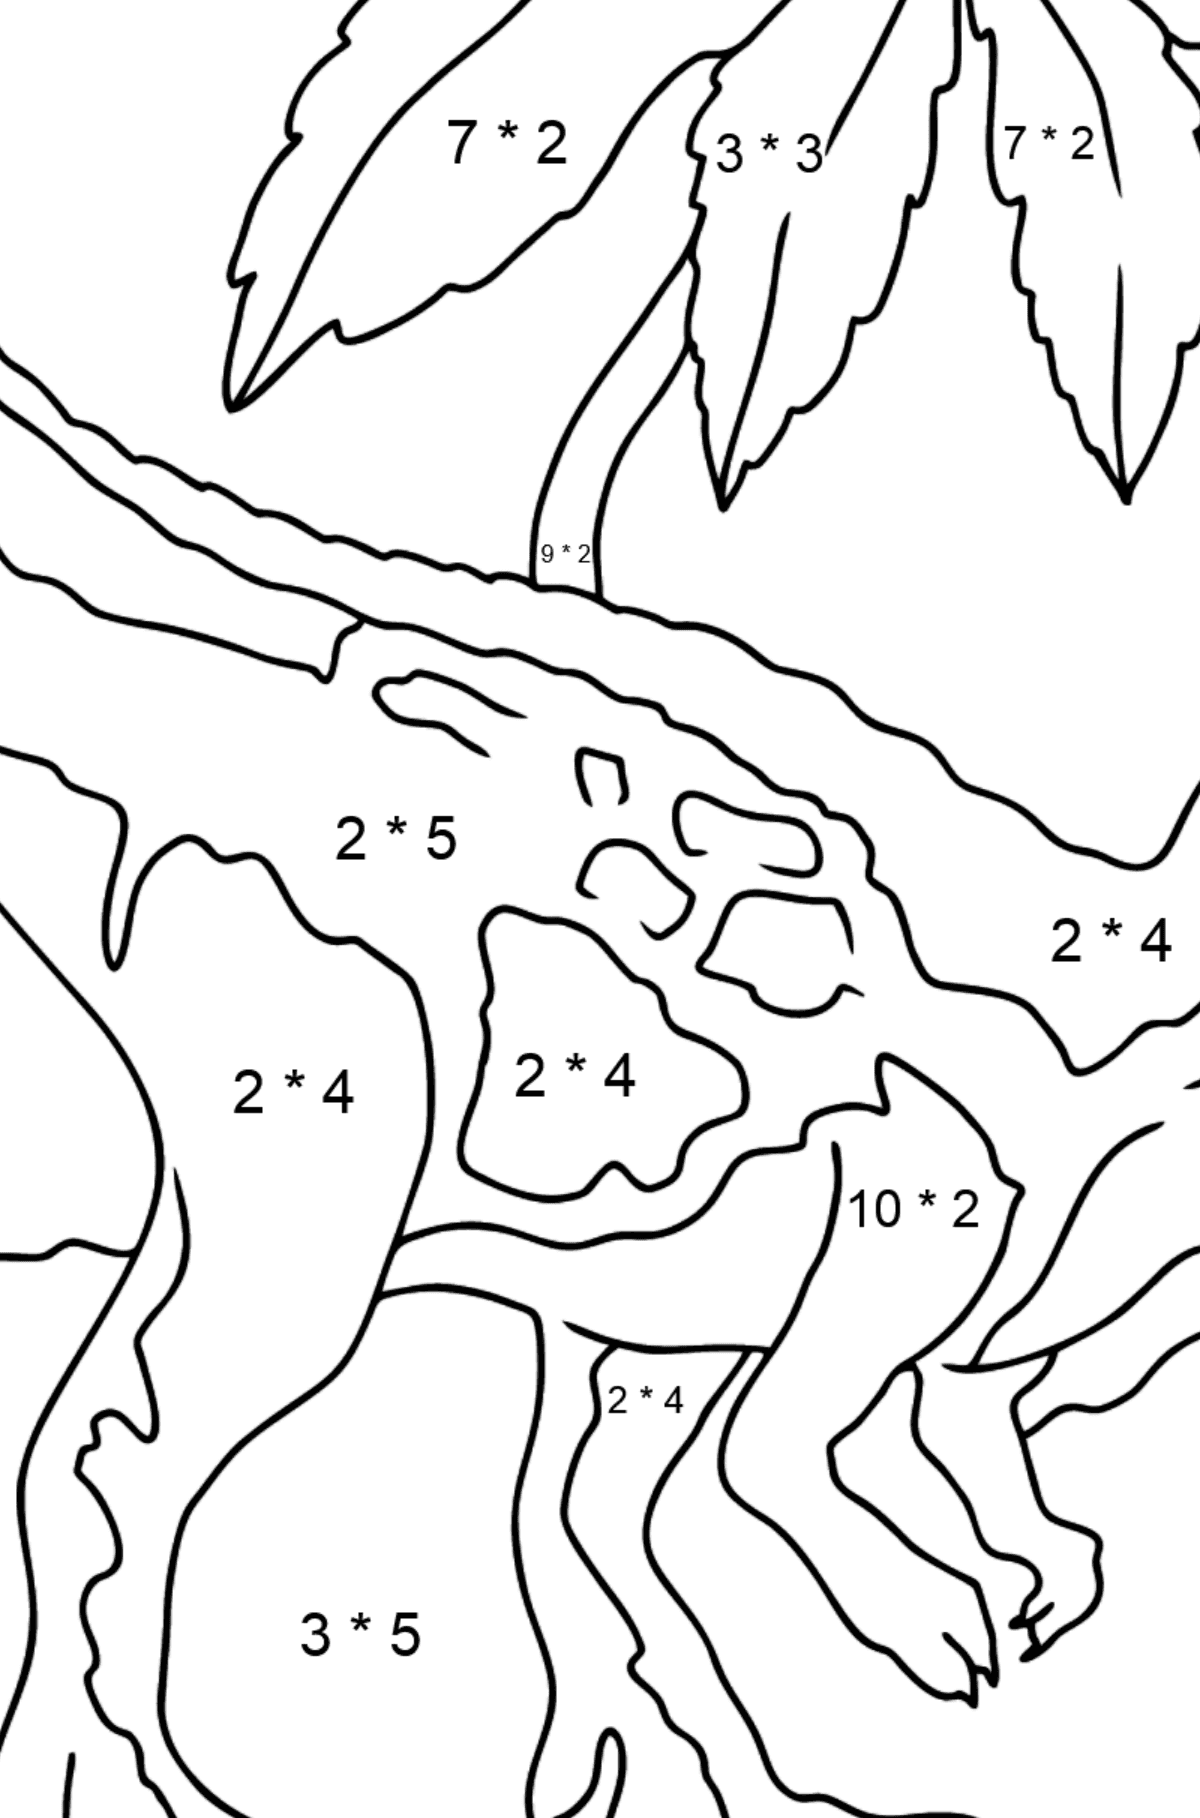 Coloring Page - Tyrannosaurus - A Terrestrial Predator - Math Coloring - Multiplication for Kids